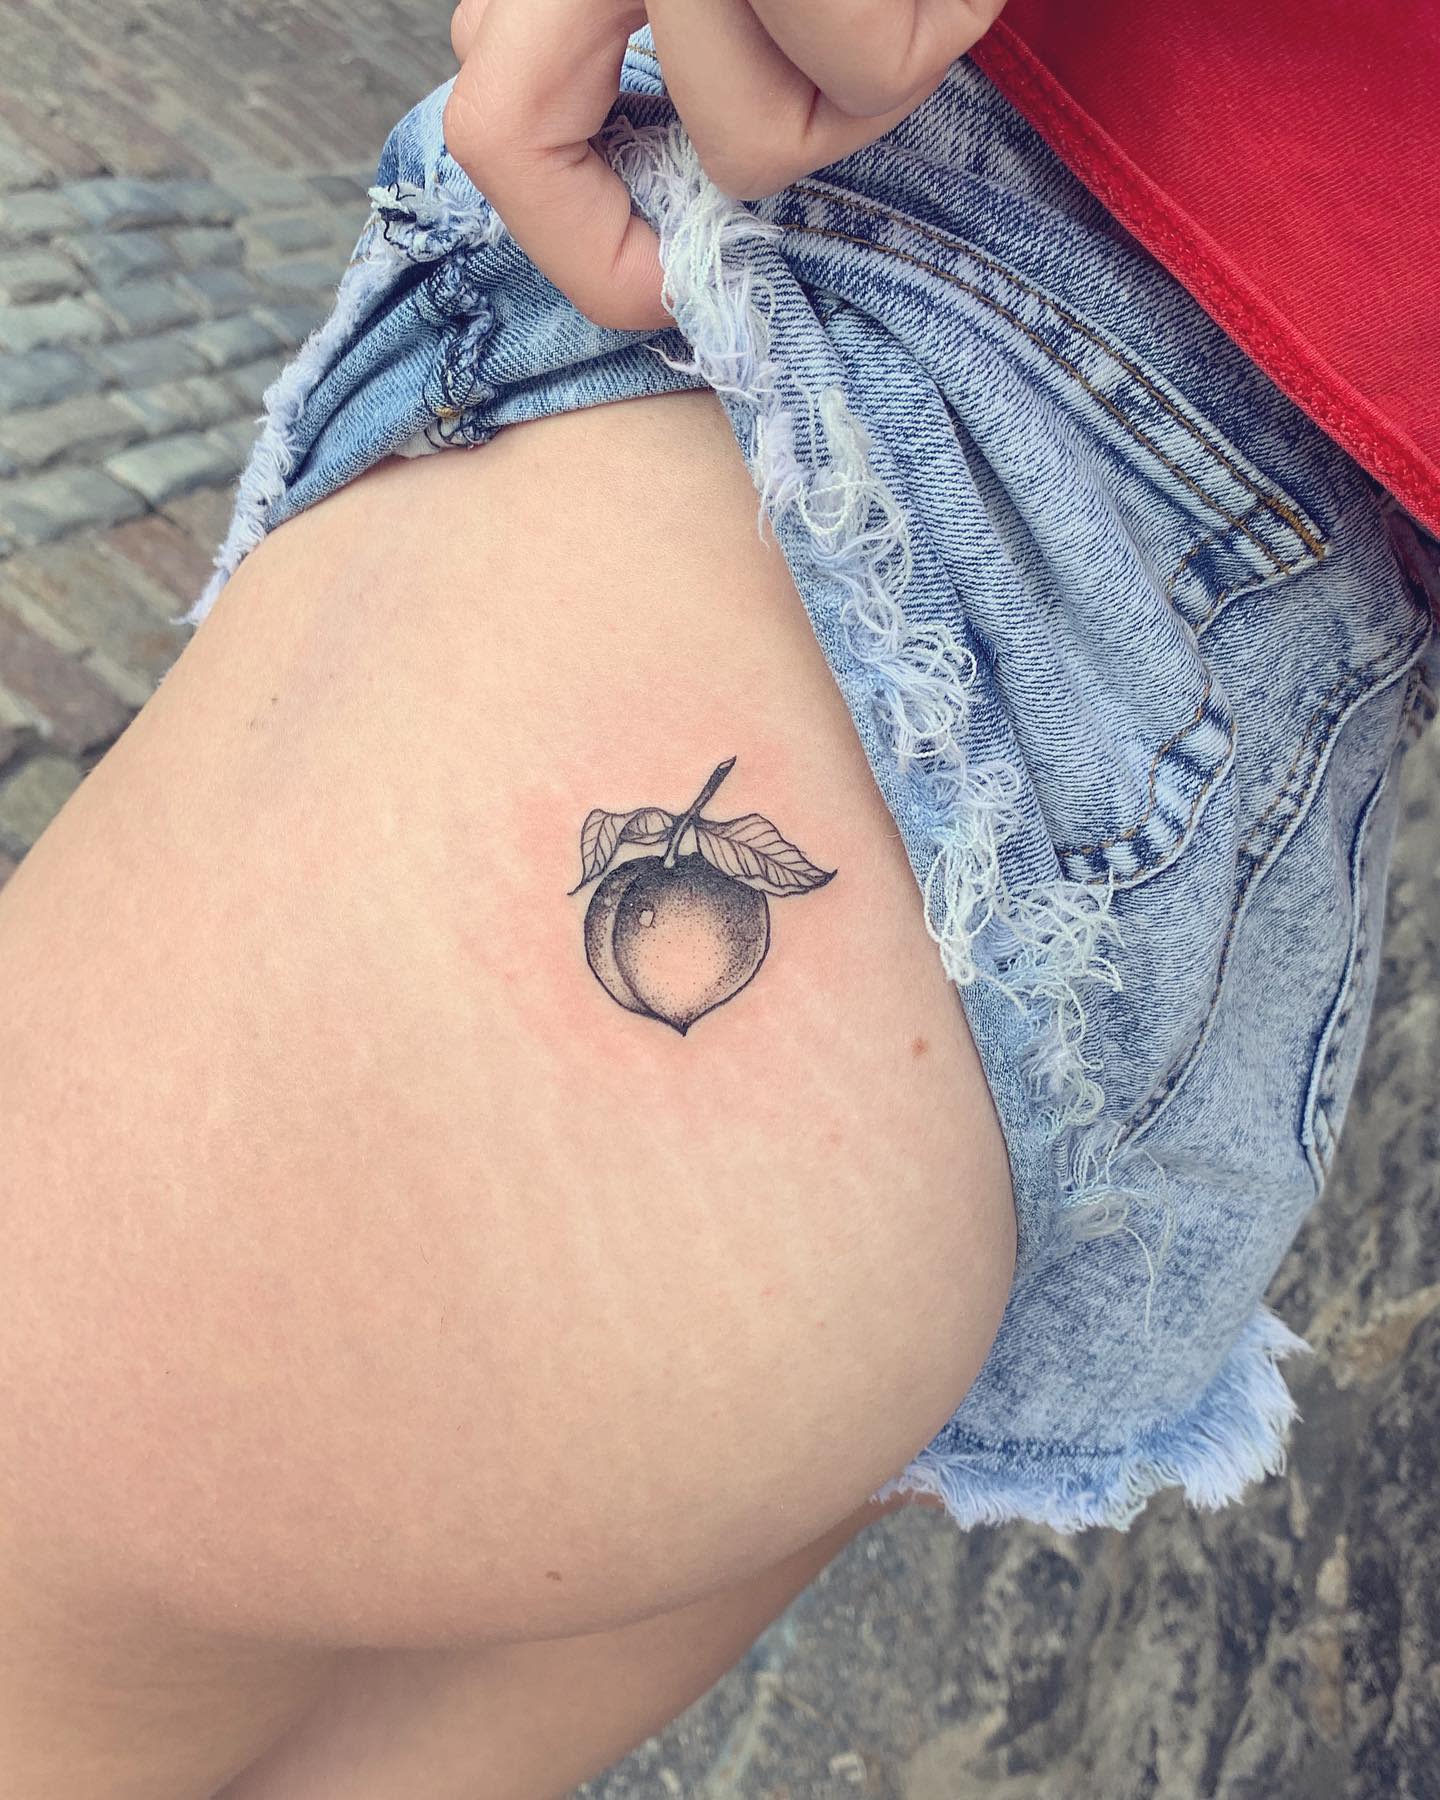 Another fruit for Ireland   Next to the healed peach  interlude tattoo  Instagram